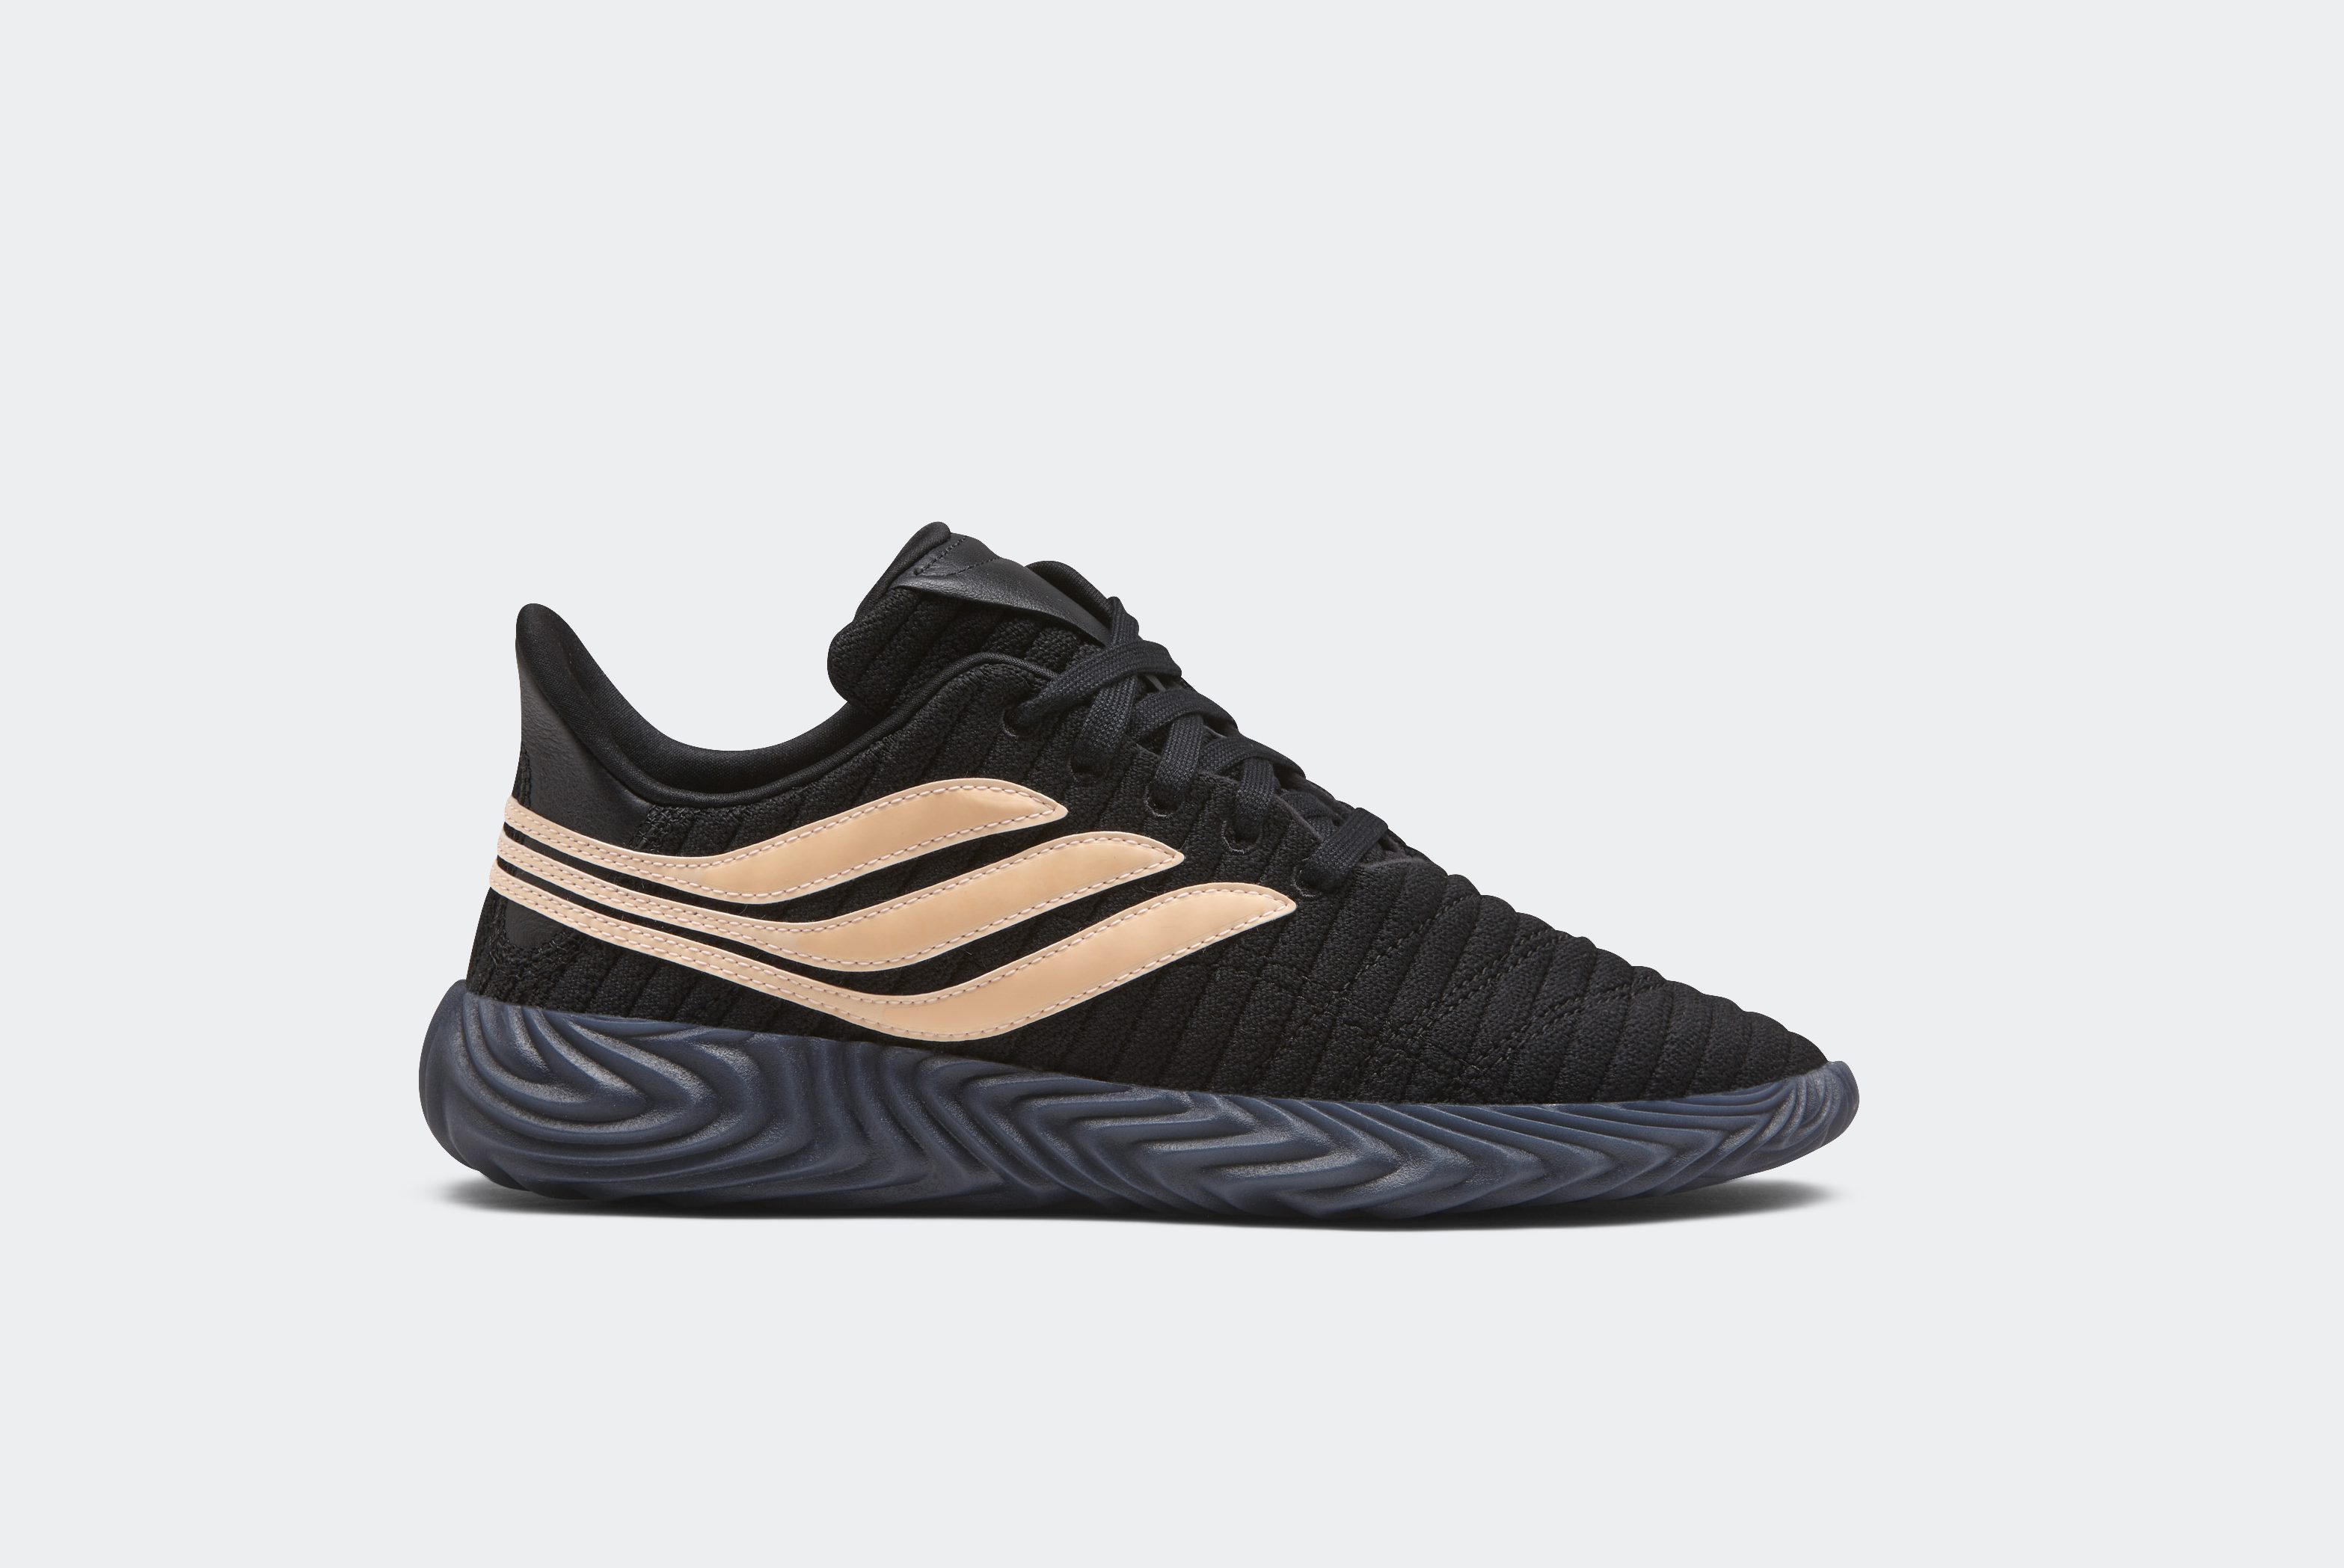 A New adidas Sobakov is Dropping Next Week - WearTesters